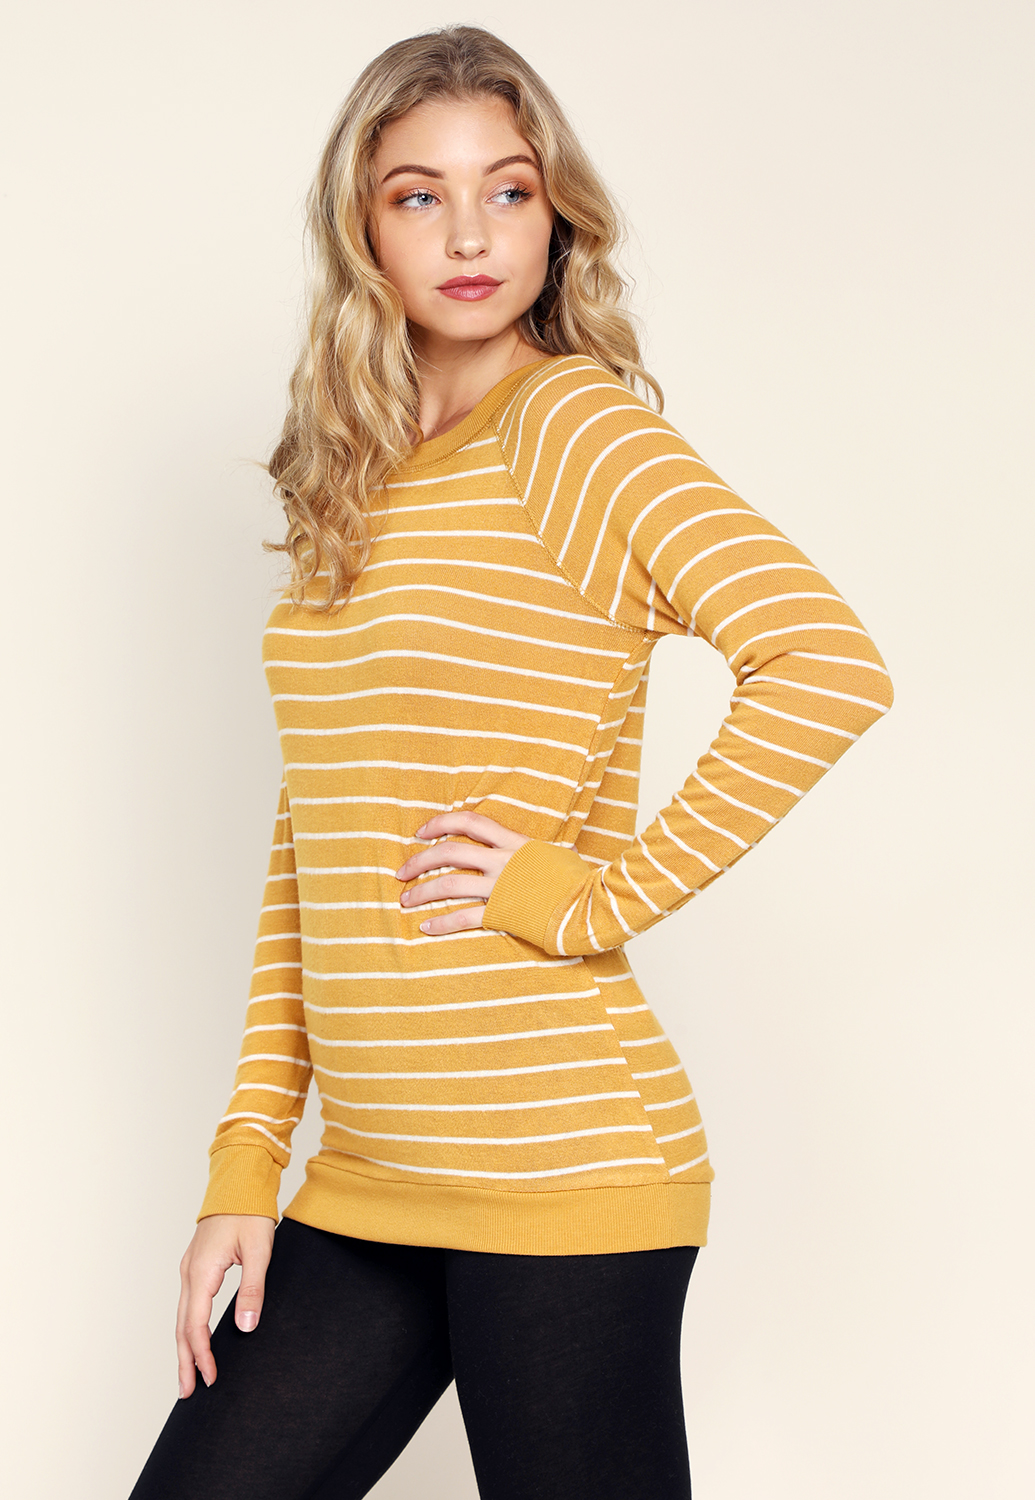 Striped Long Sleeve Top